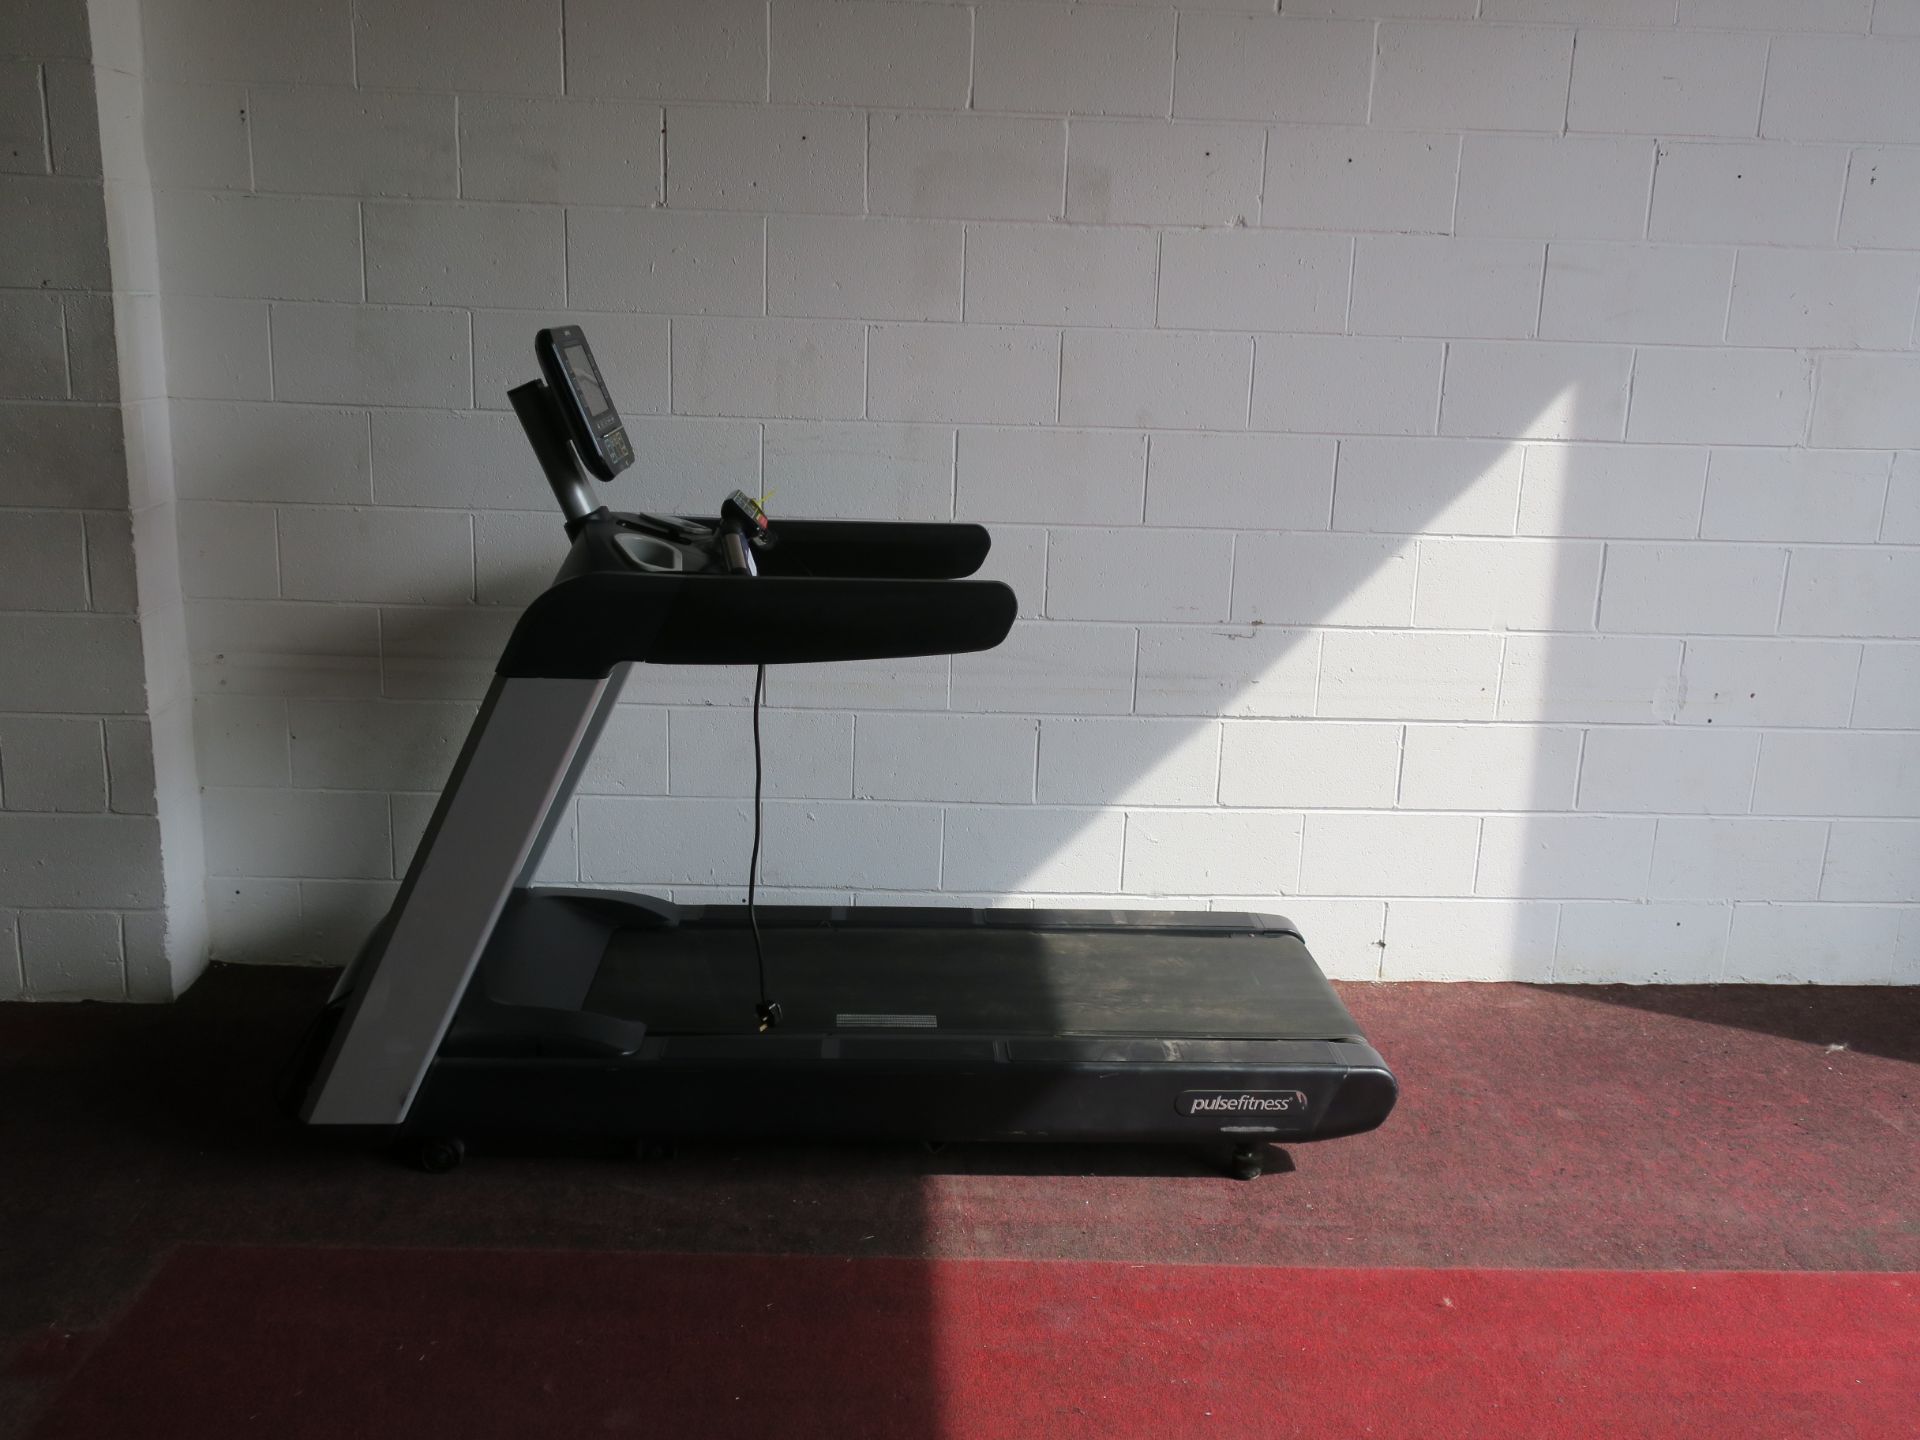 * A Pulse Fitness Model 260G Treadmill with interactive screen, heart rate monitors, cup holders, - Image 2 of 6